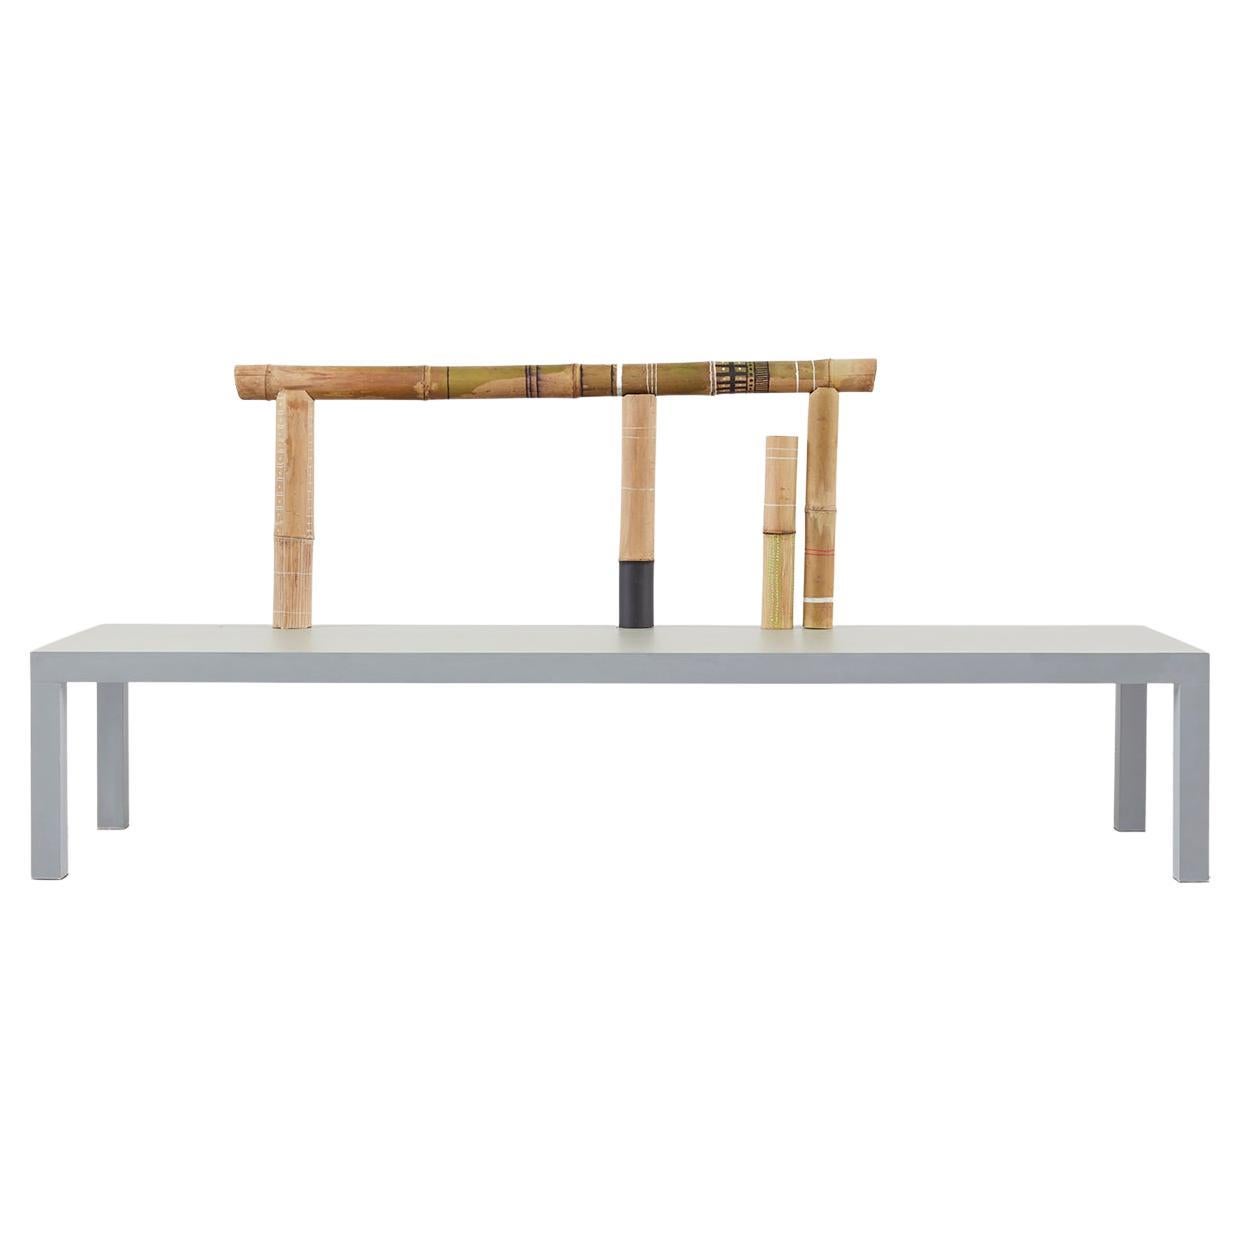 Andrea Branzi, Bamboo "Germinal" Bench For Sale